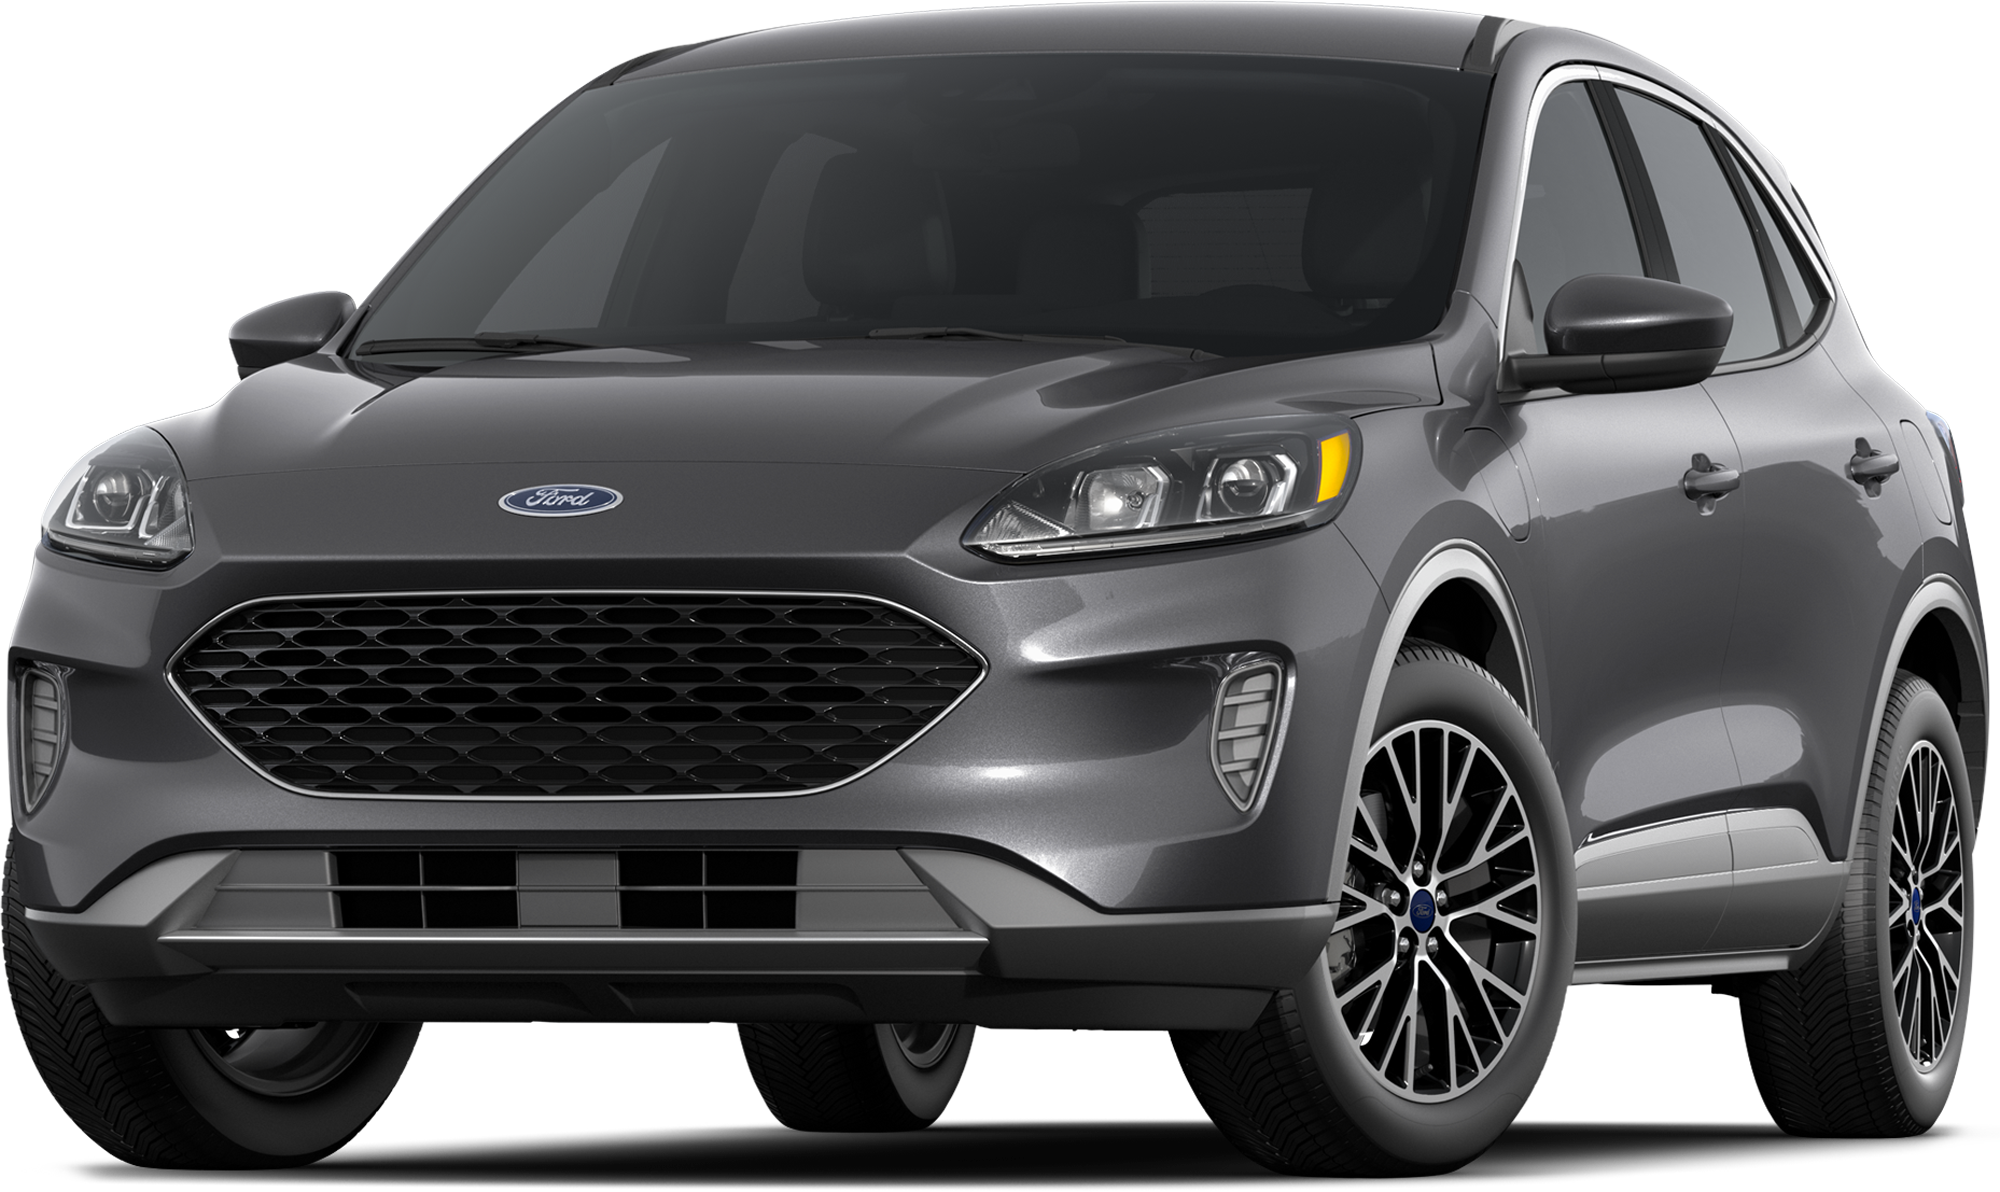 2022 Ford Escape PHEV Incentives, Specials & Offers in Williamston NC